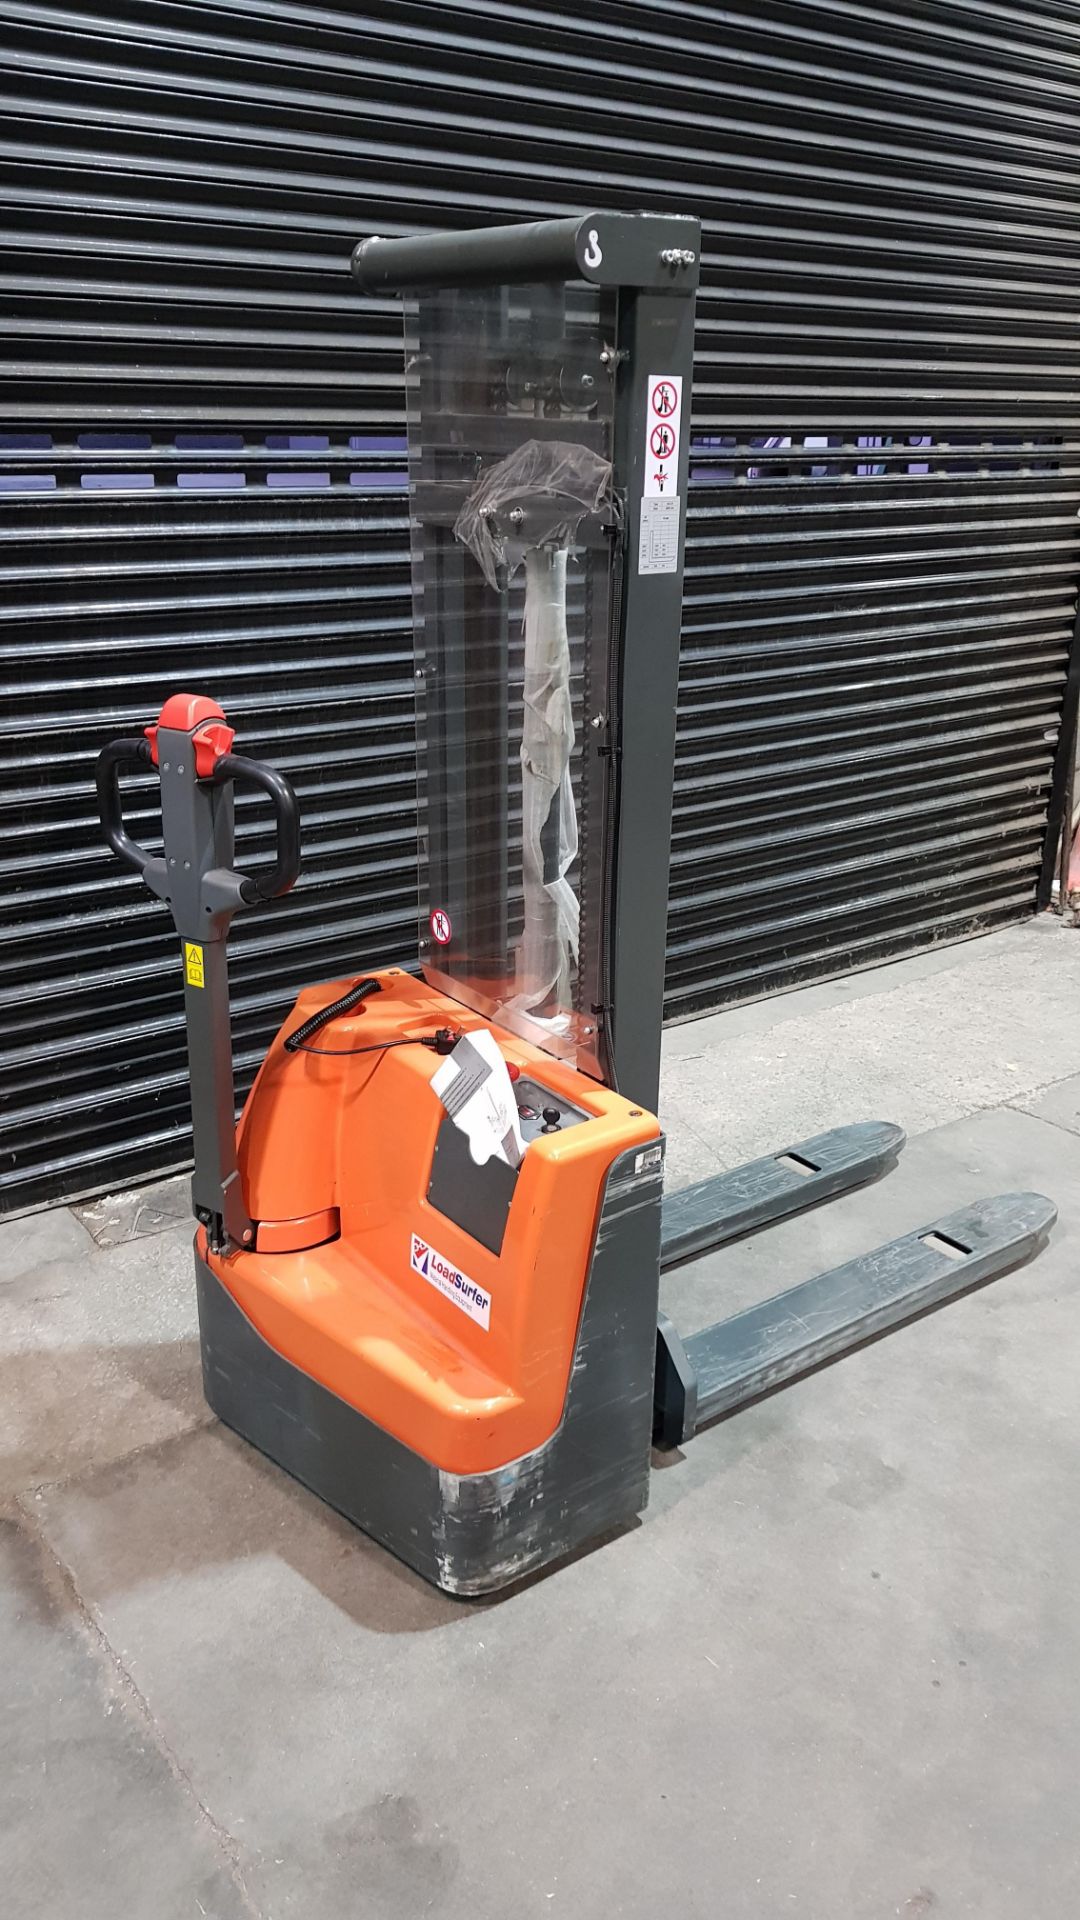 TACKLESTONE TYPE ECL10 PEDESTRIAN ELECTRIC STACKER (YOM 2018) 240V WITH KEY & INSTRUCTION MANUAL